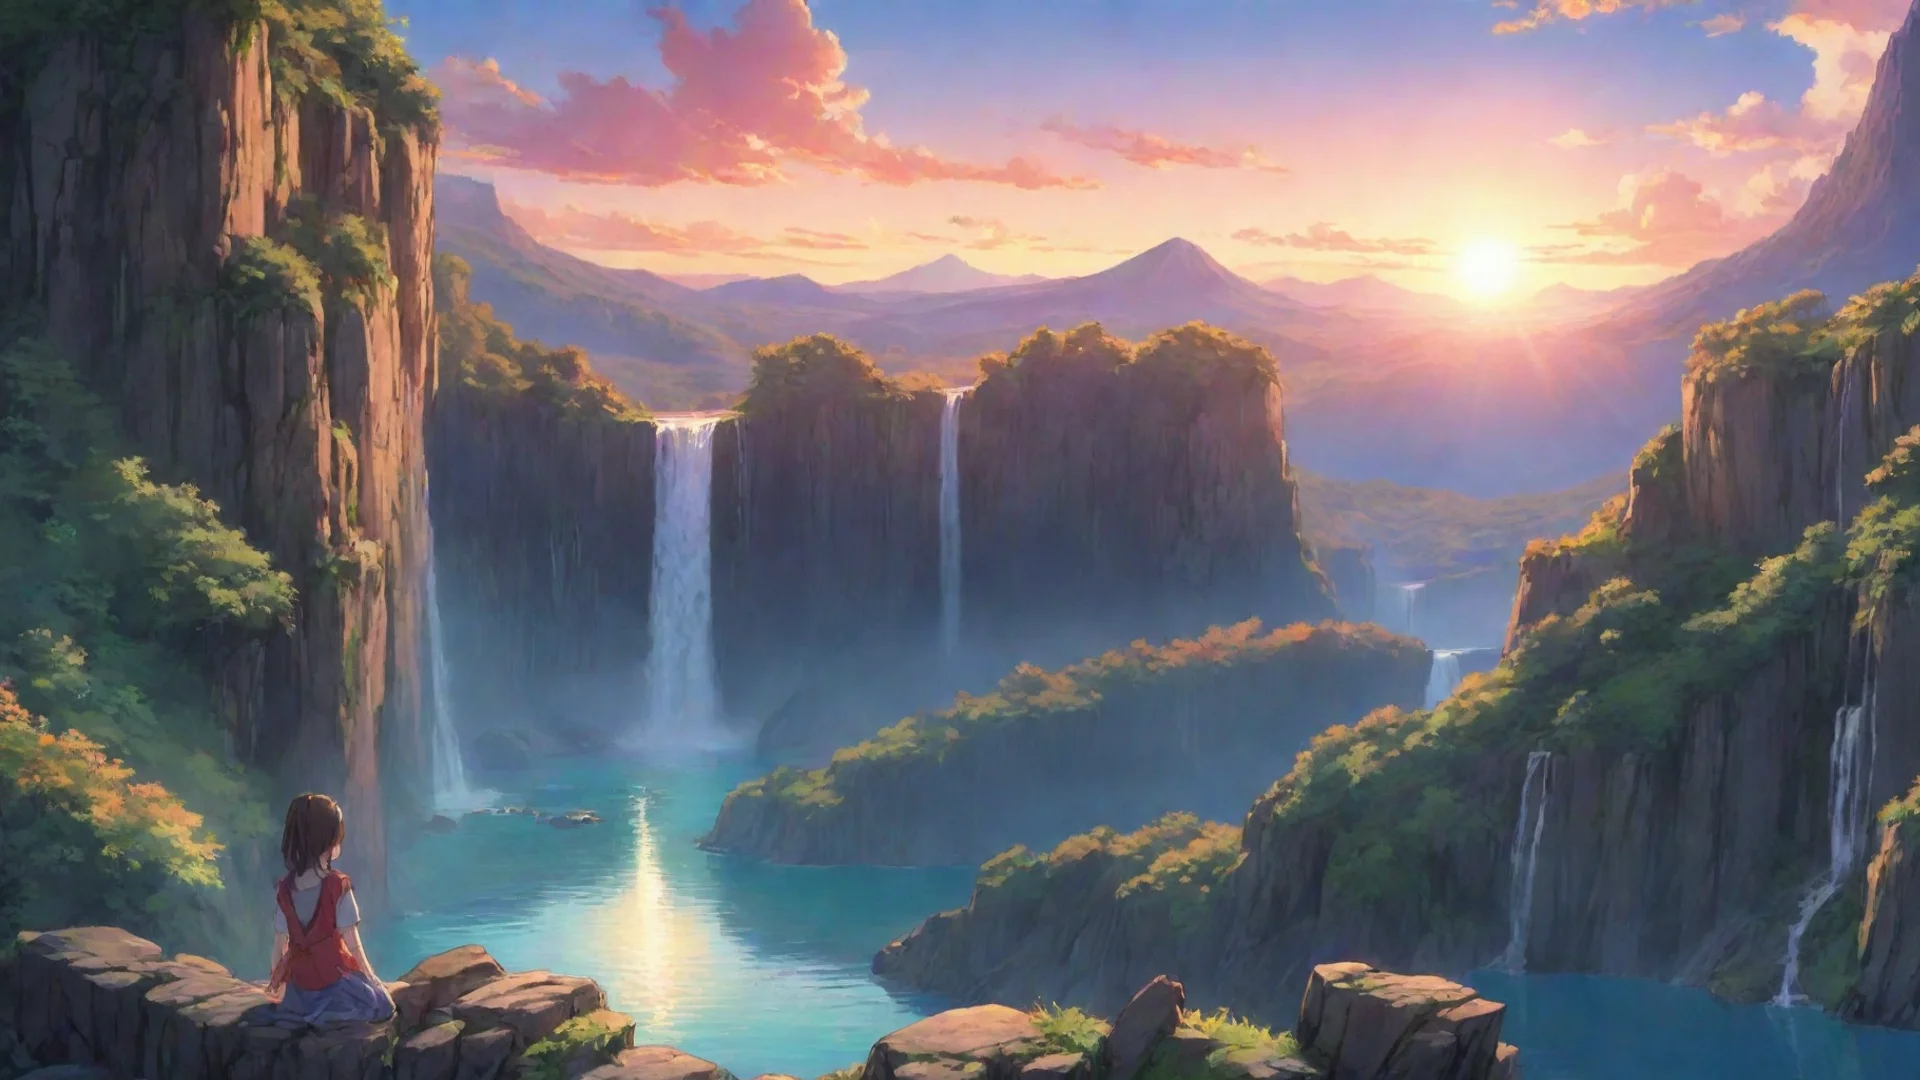 aiamazing beautiful chill anime scene girl sitting relaxing looking over at beautiful landscape water lake cliffs waterfalls extremely colorful sunset awesome portrait 2 wide